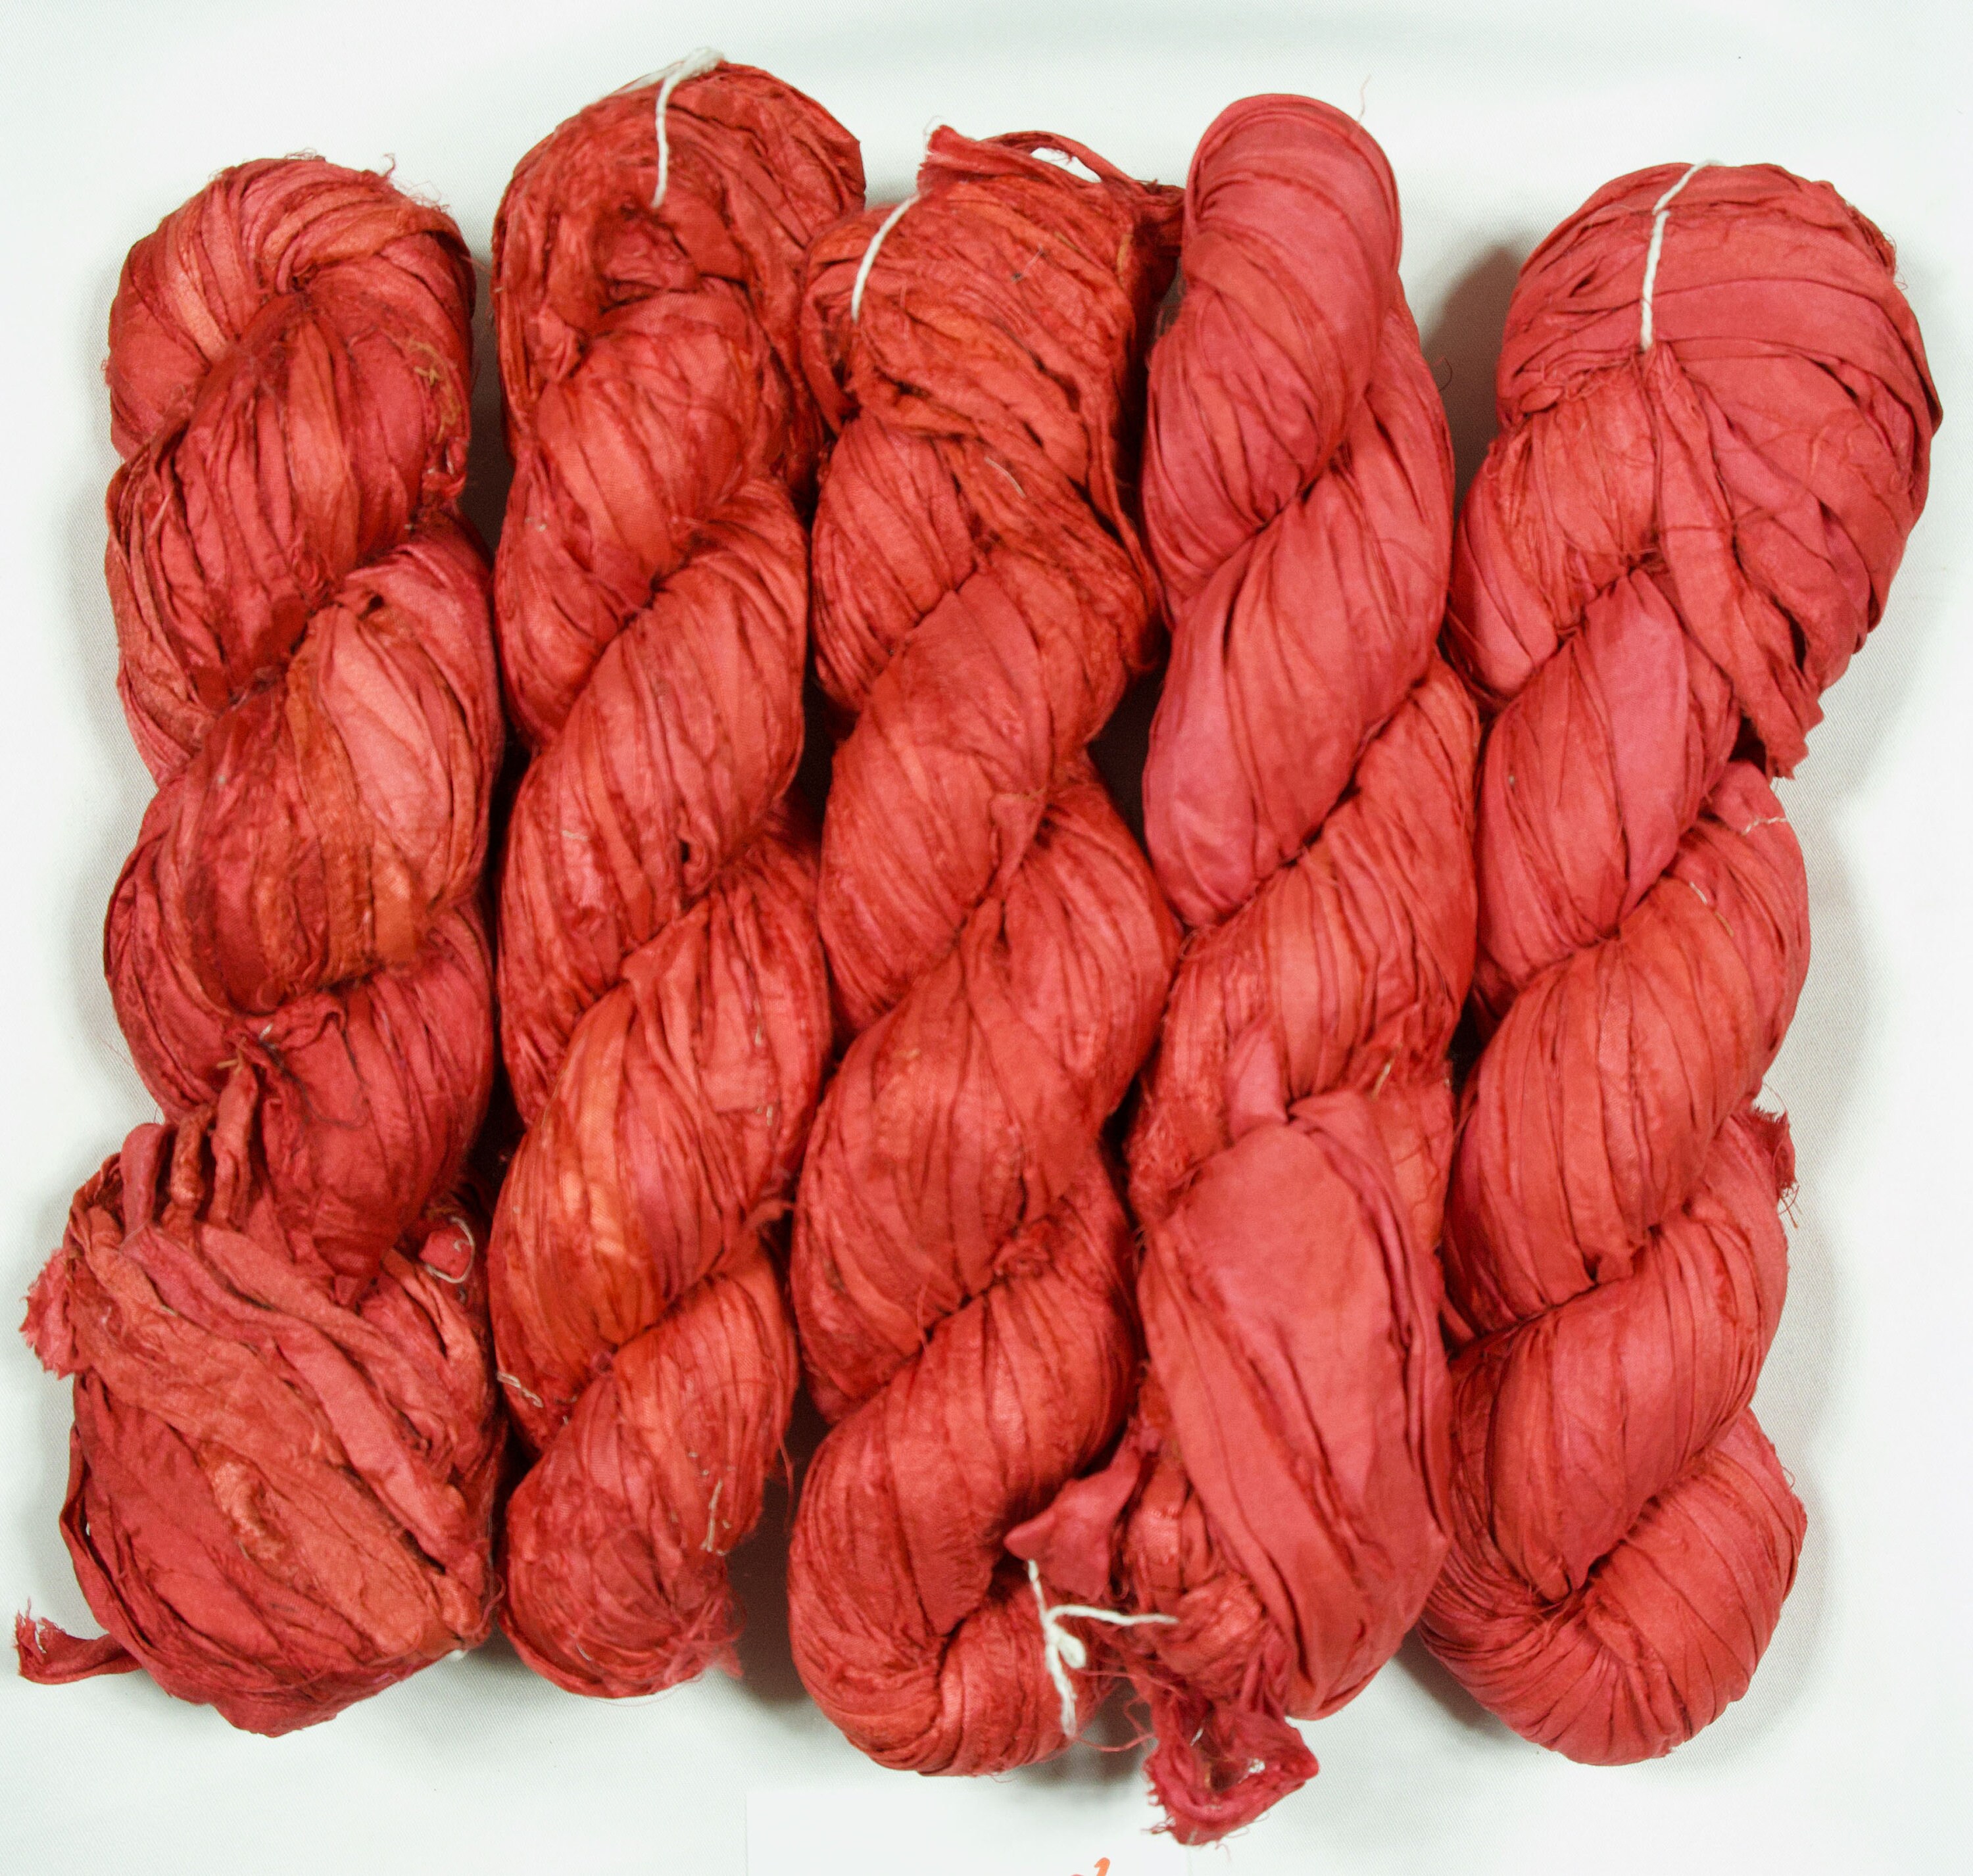 Thin Elastic Cord Supplies, Red Thin, Silicon Cord, Very Thin Elastic Cord  Supplies for Crafts Making and Gift Wrapping, 8 Yards-7.31 Metres 